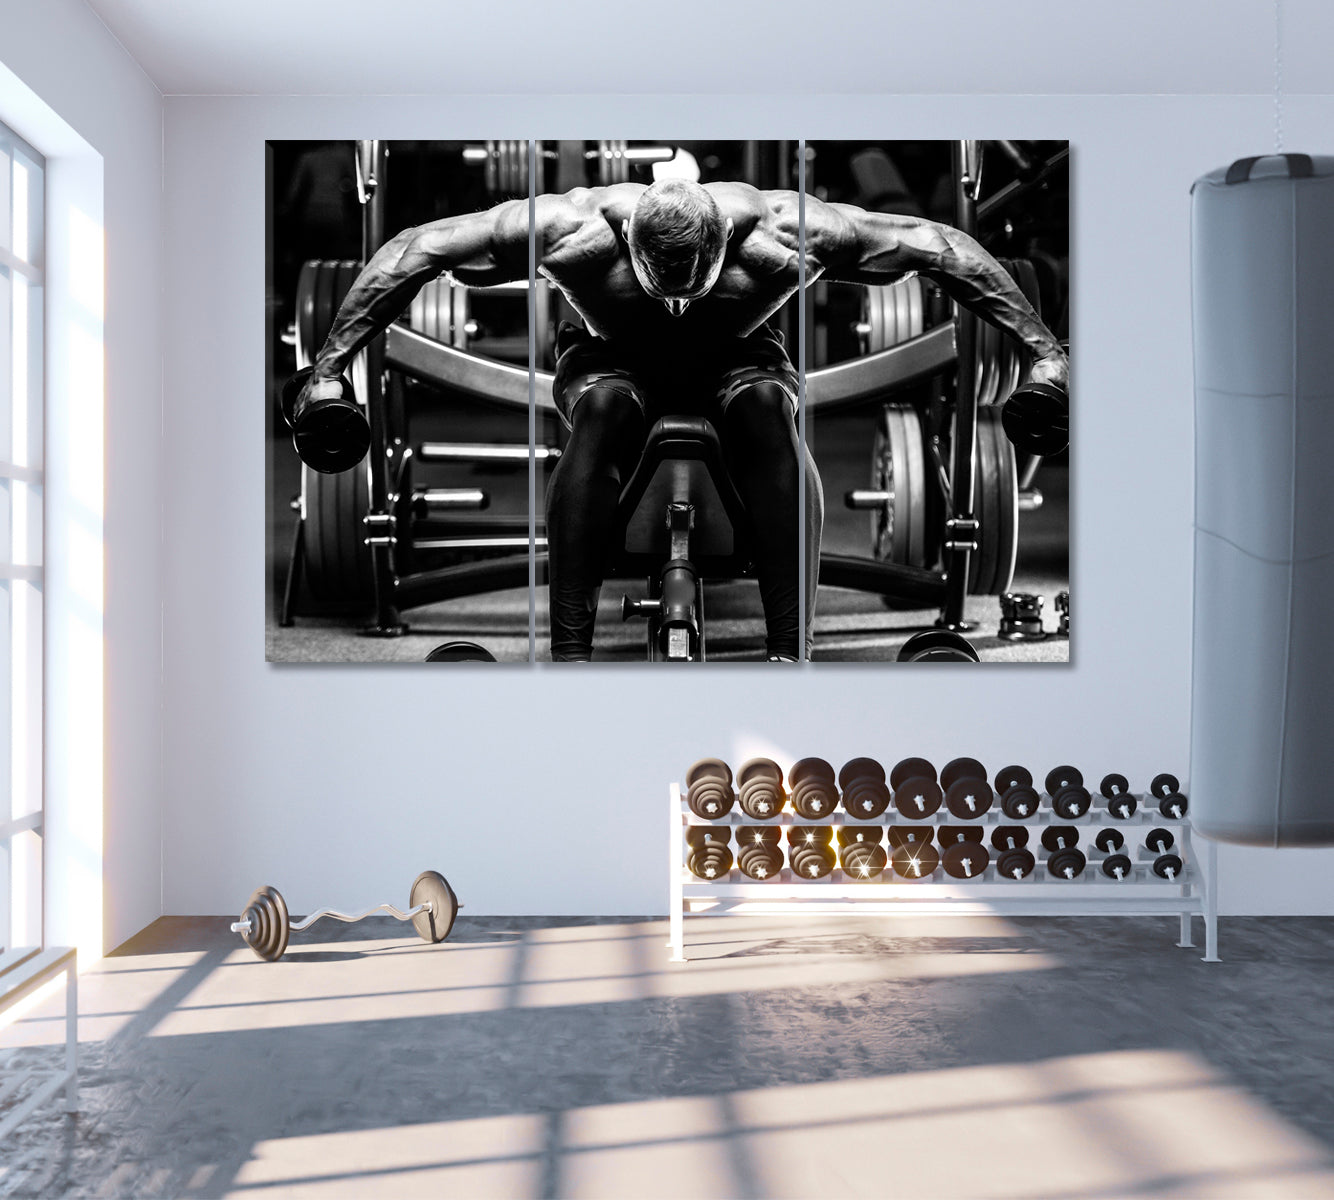 Bodybuilding Workout Canvas Print ArtLexy 3 Panels 36"x24" inches 